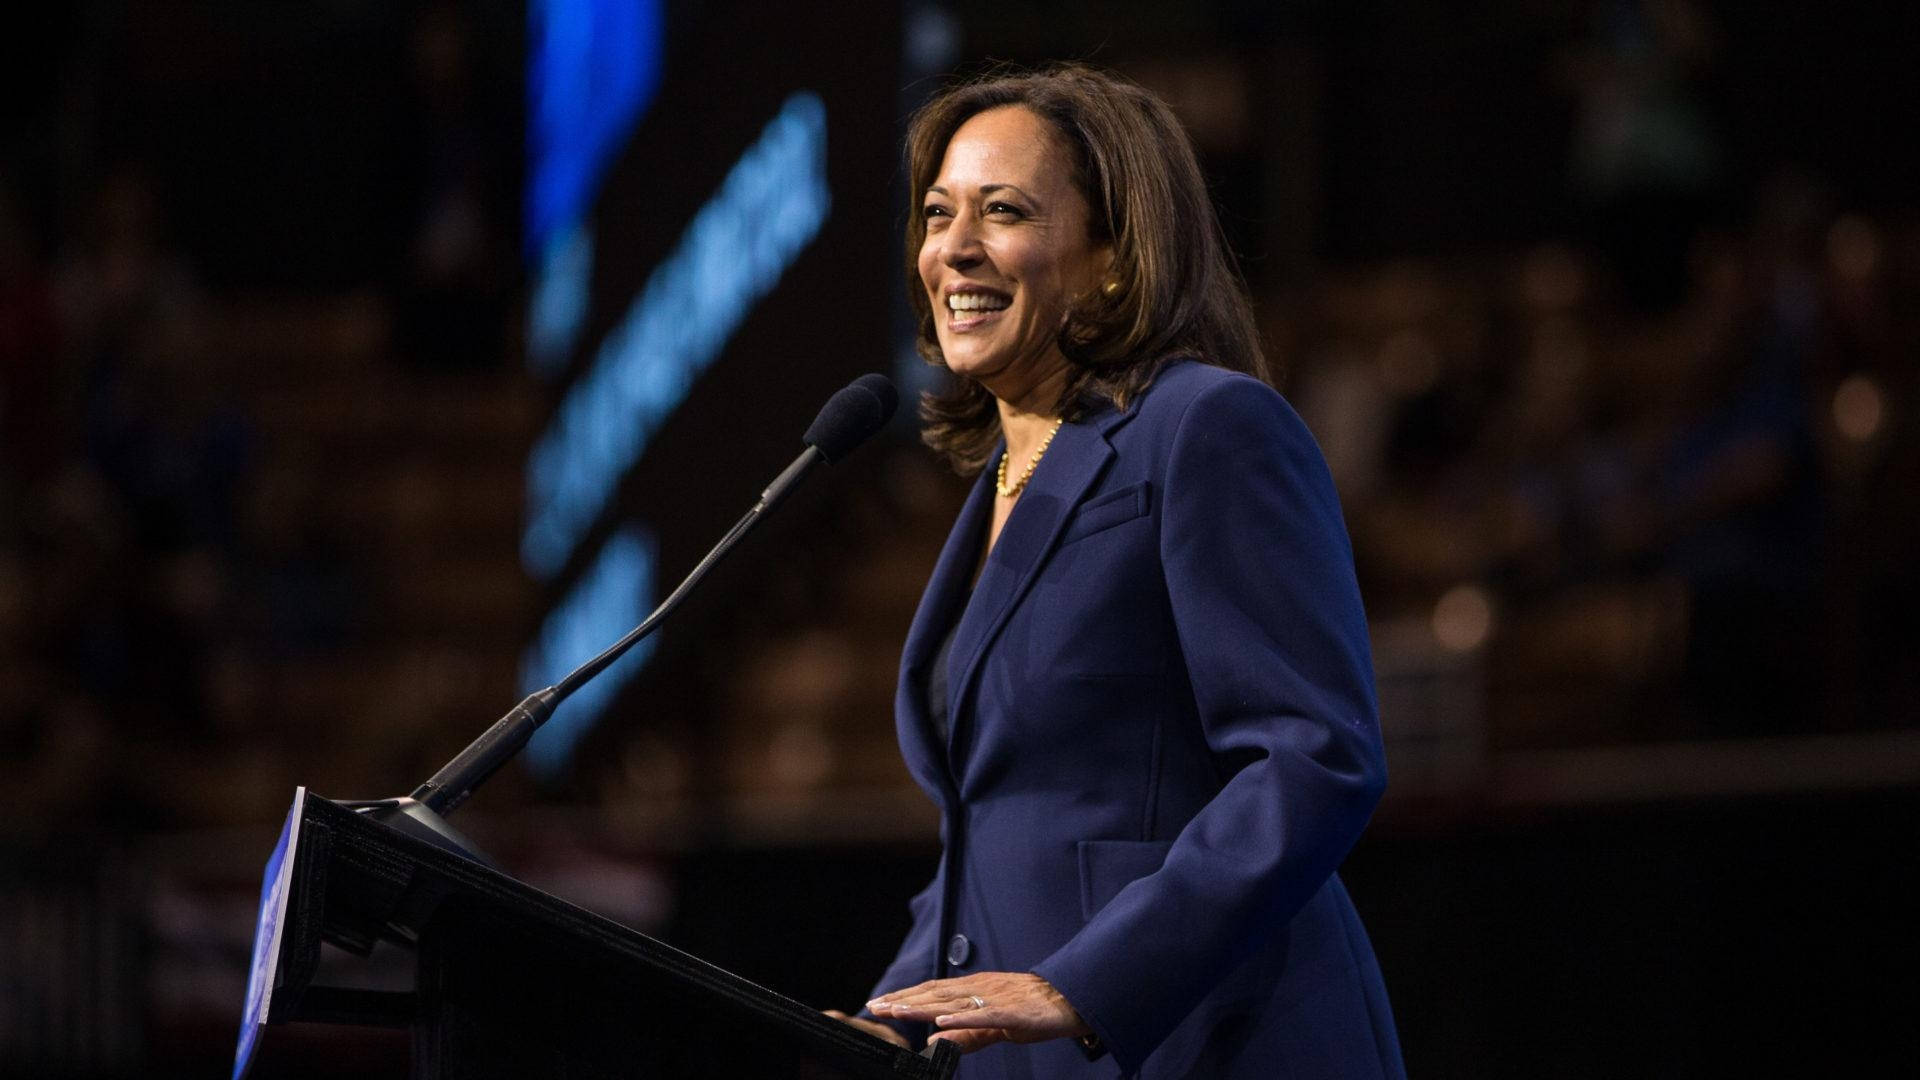 Kamalaharris Leende På Scenen. (this Would Be A Suitable Translation For A Computer Or Mobile Wallpaper Featuring Kamala Harris Smiling Onstage.) Wallpaper